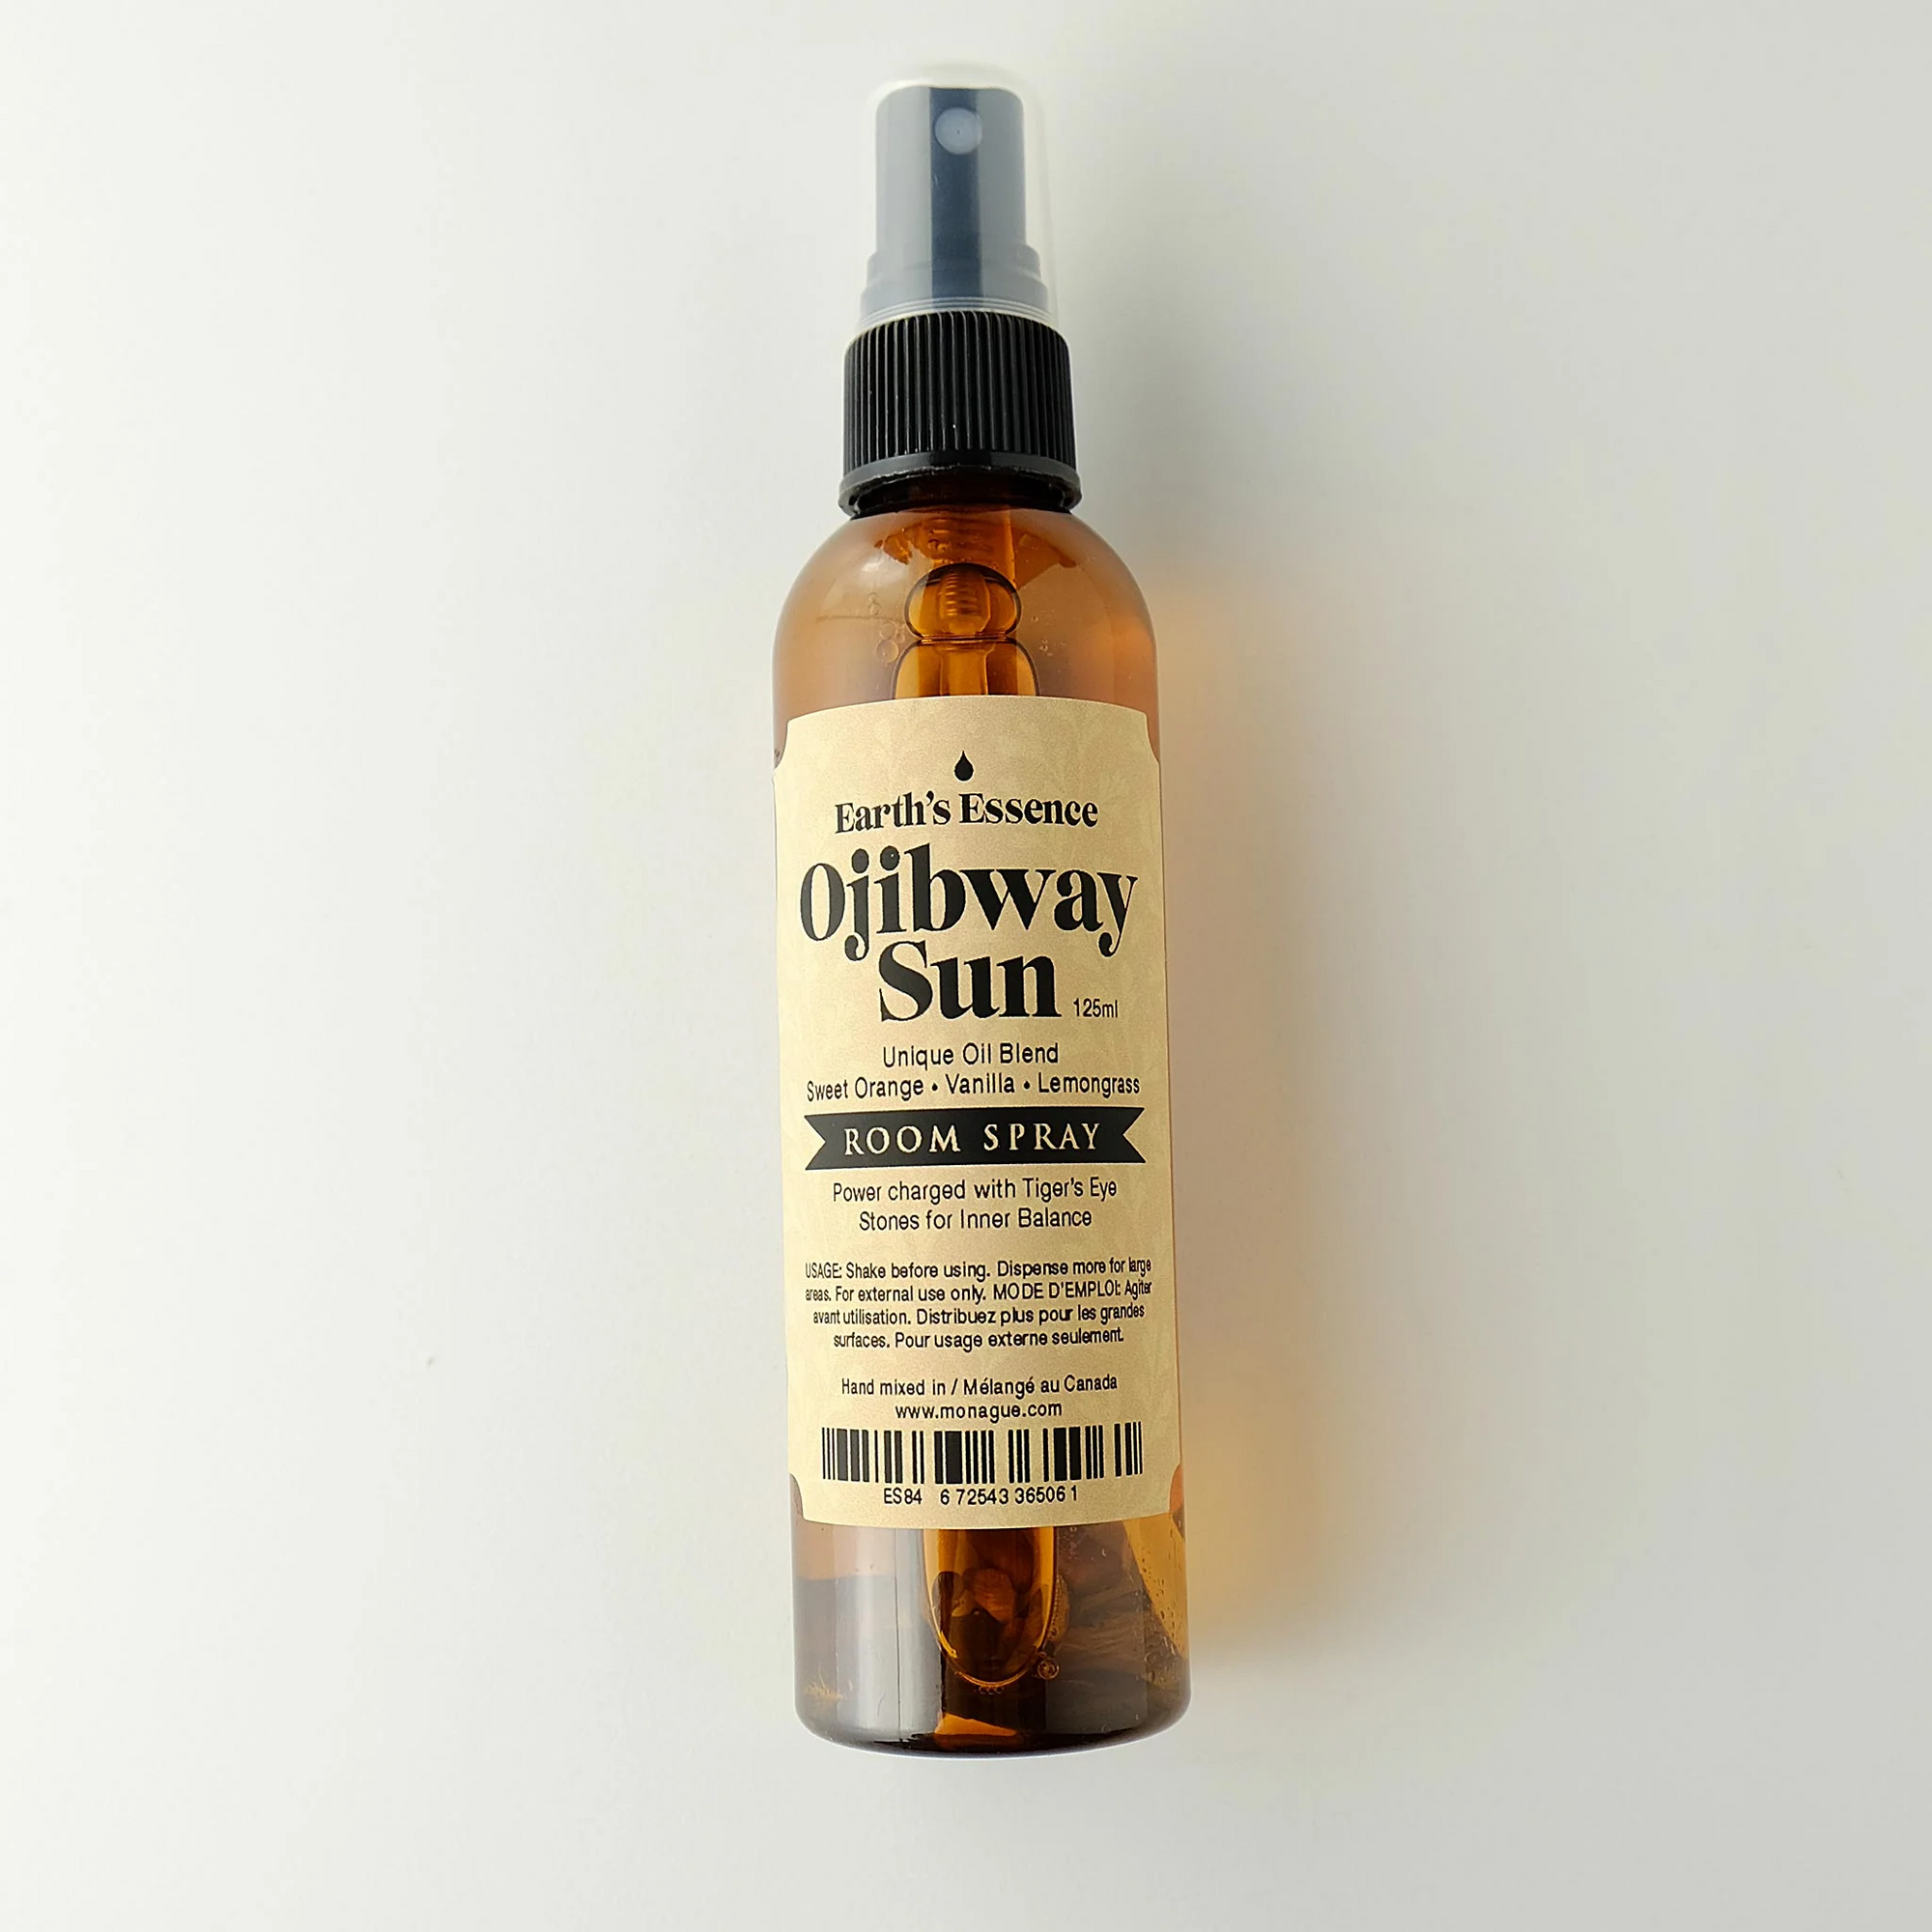 125ml Room Spray - Ojibway Sun with Tiger's Eye stones Regular price - 125ml Room Spray - Ojibway Sun with Tiger's Eye stones Regular price -  - House of Himwitsa Native Art Gallery and Gifts